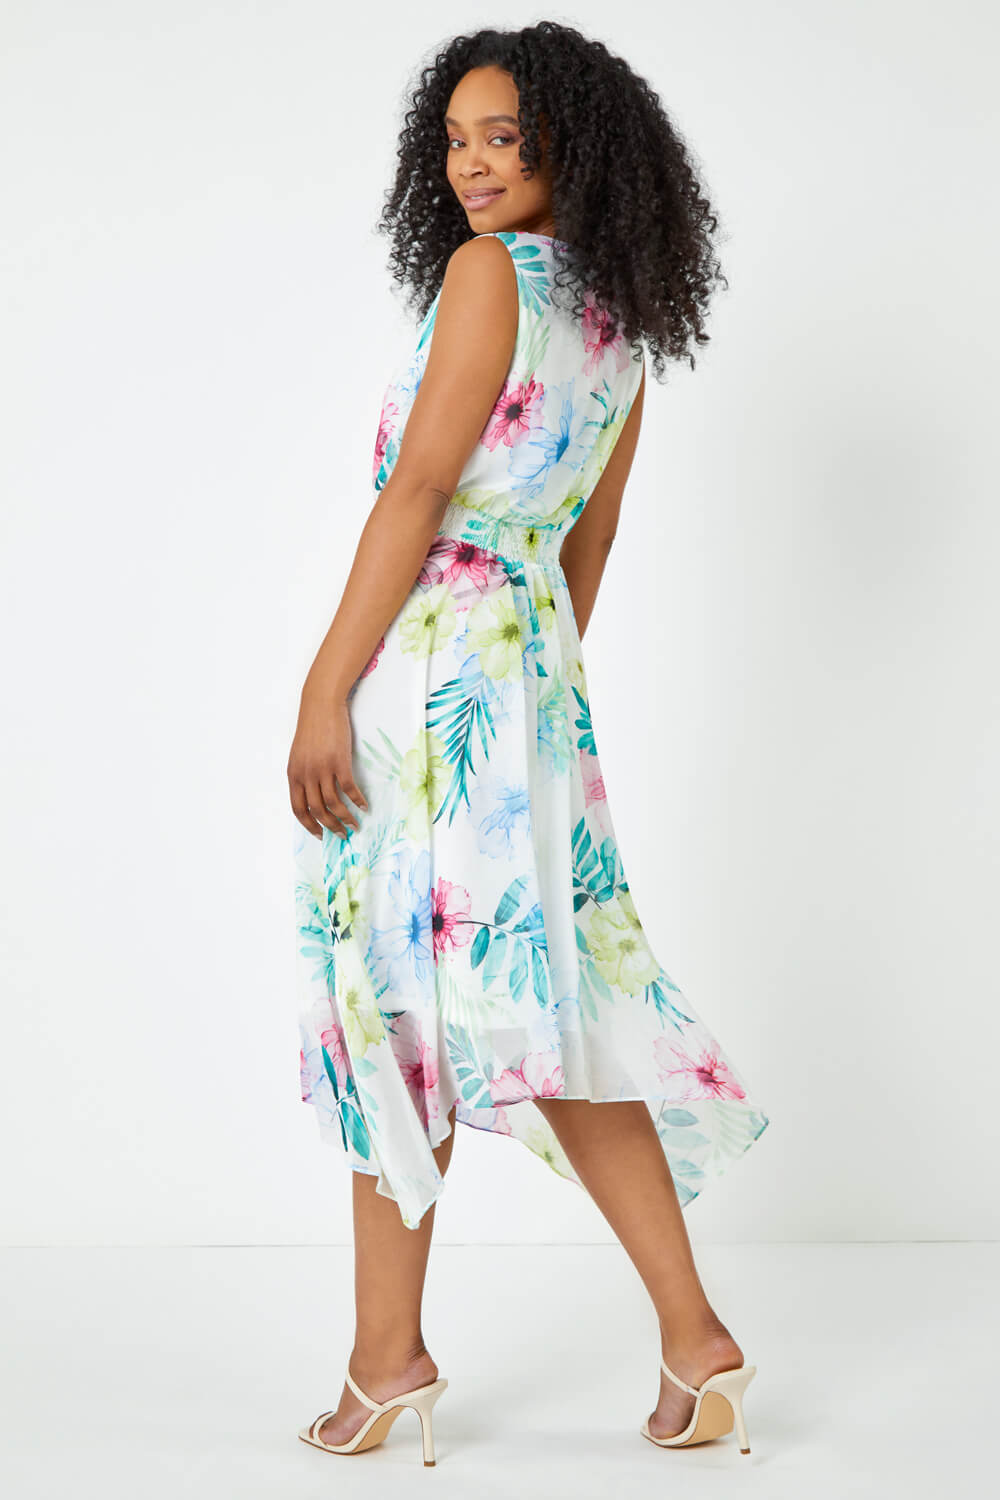 White Petite Floral Print Shirred Dress, Image 3 of 5